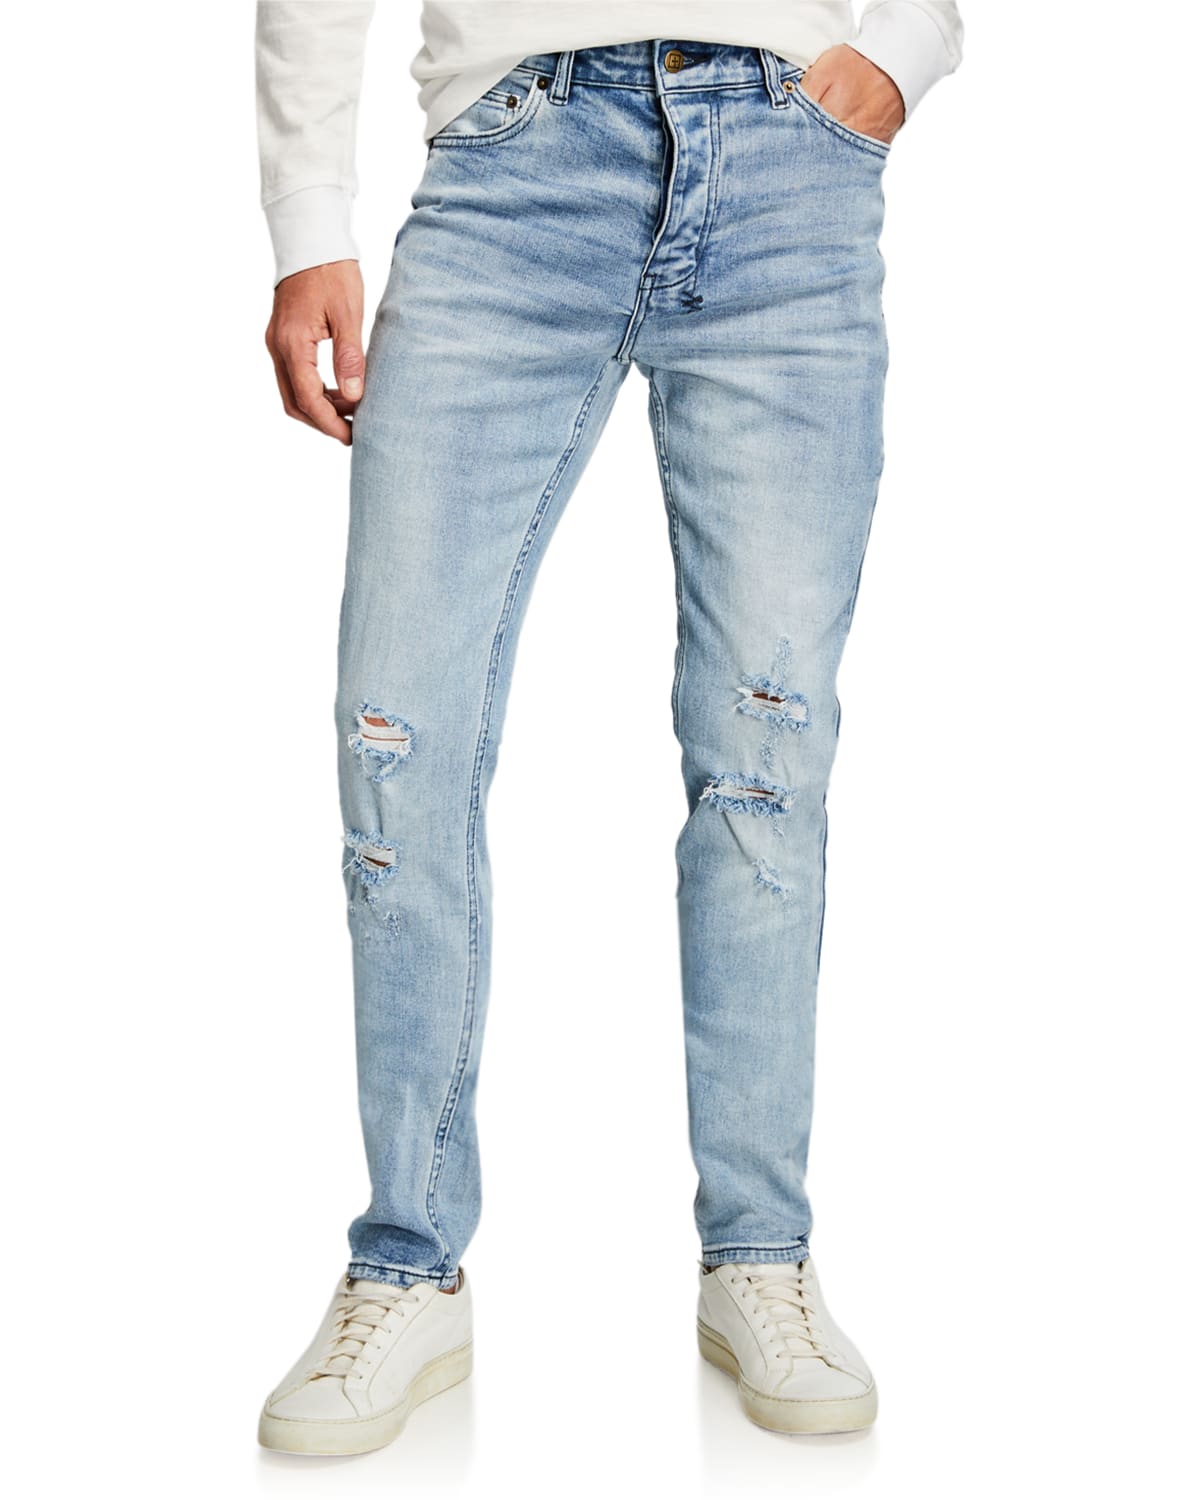 Men's Chitch Philly Distressed Jeans